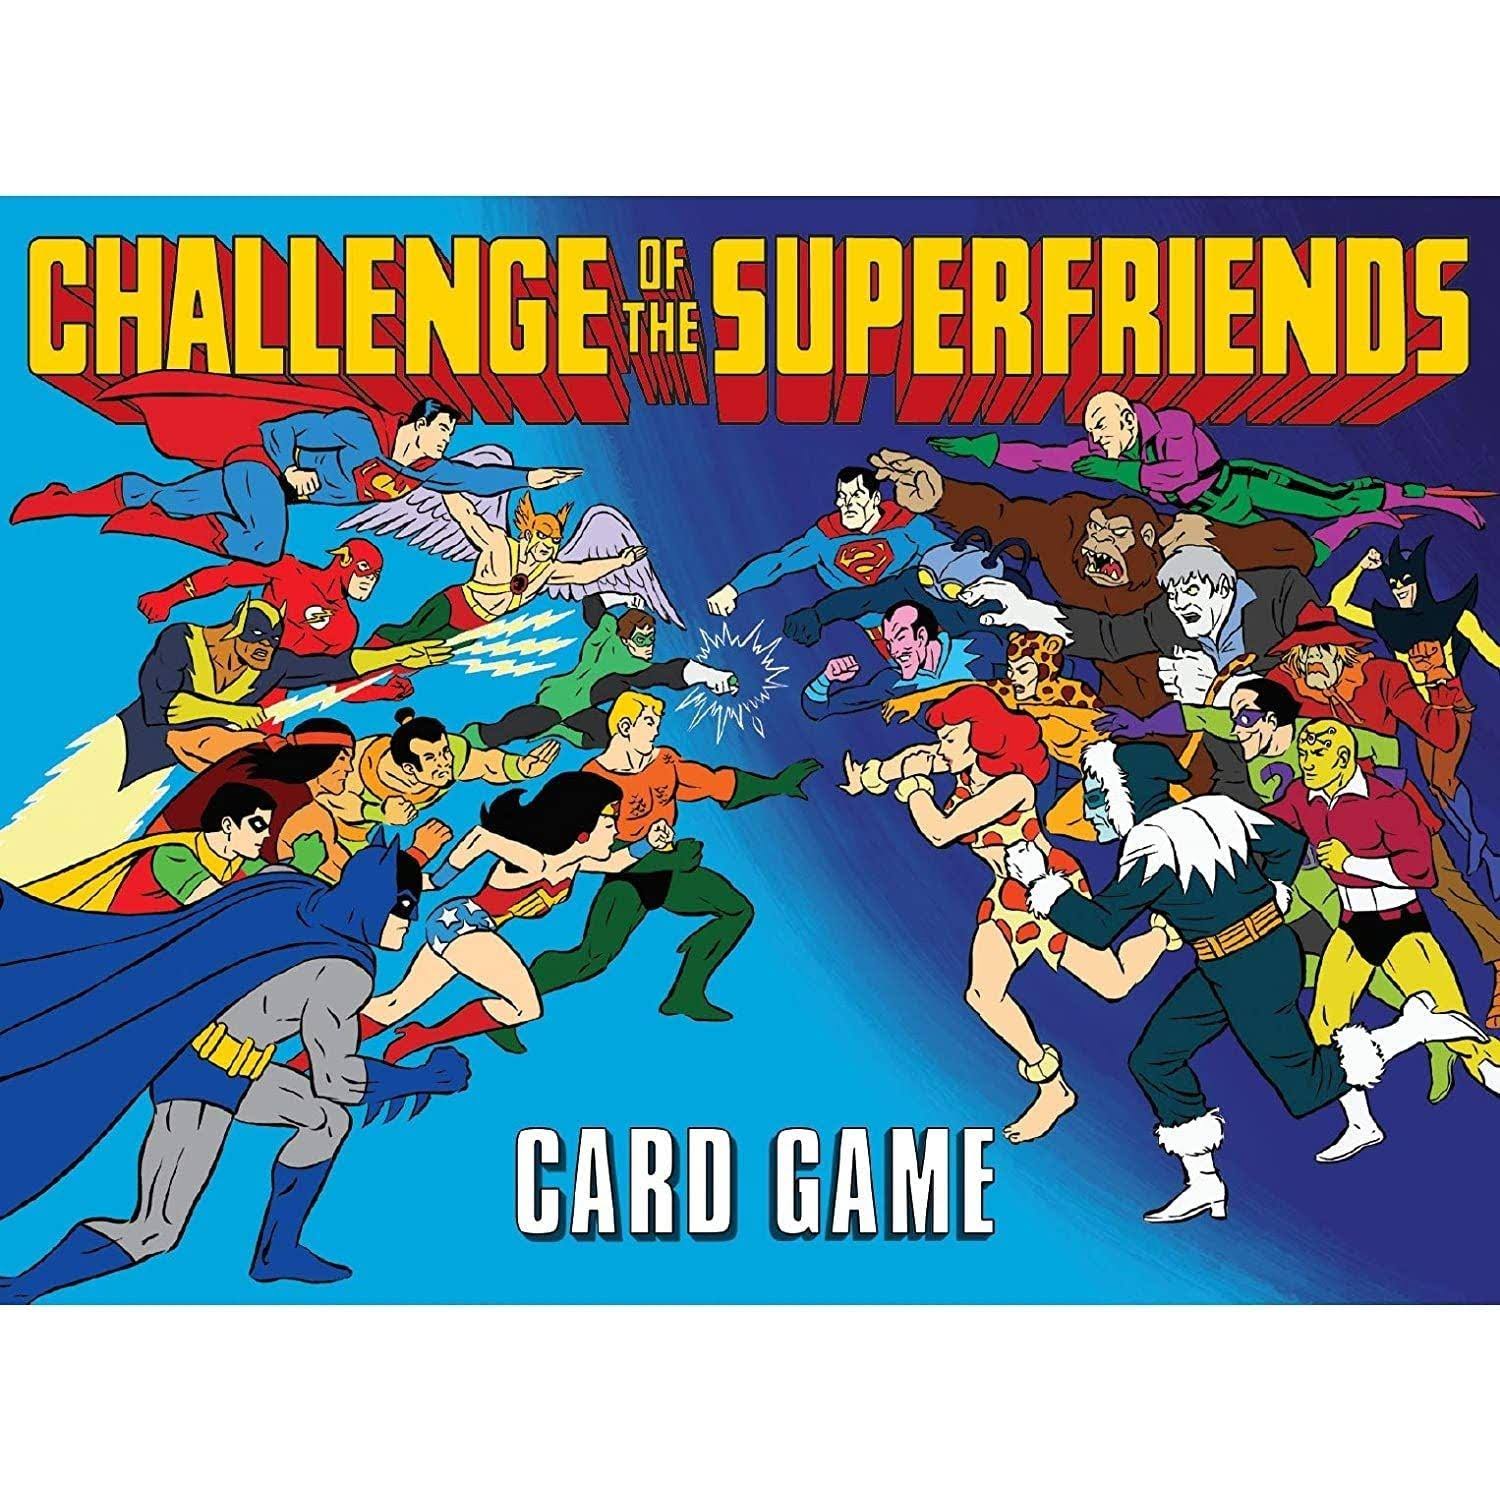 Challenge of the Superfriends Card Game